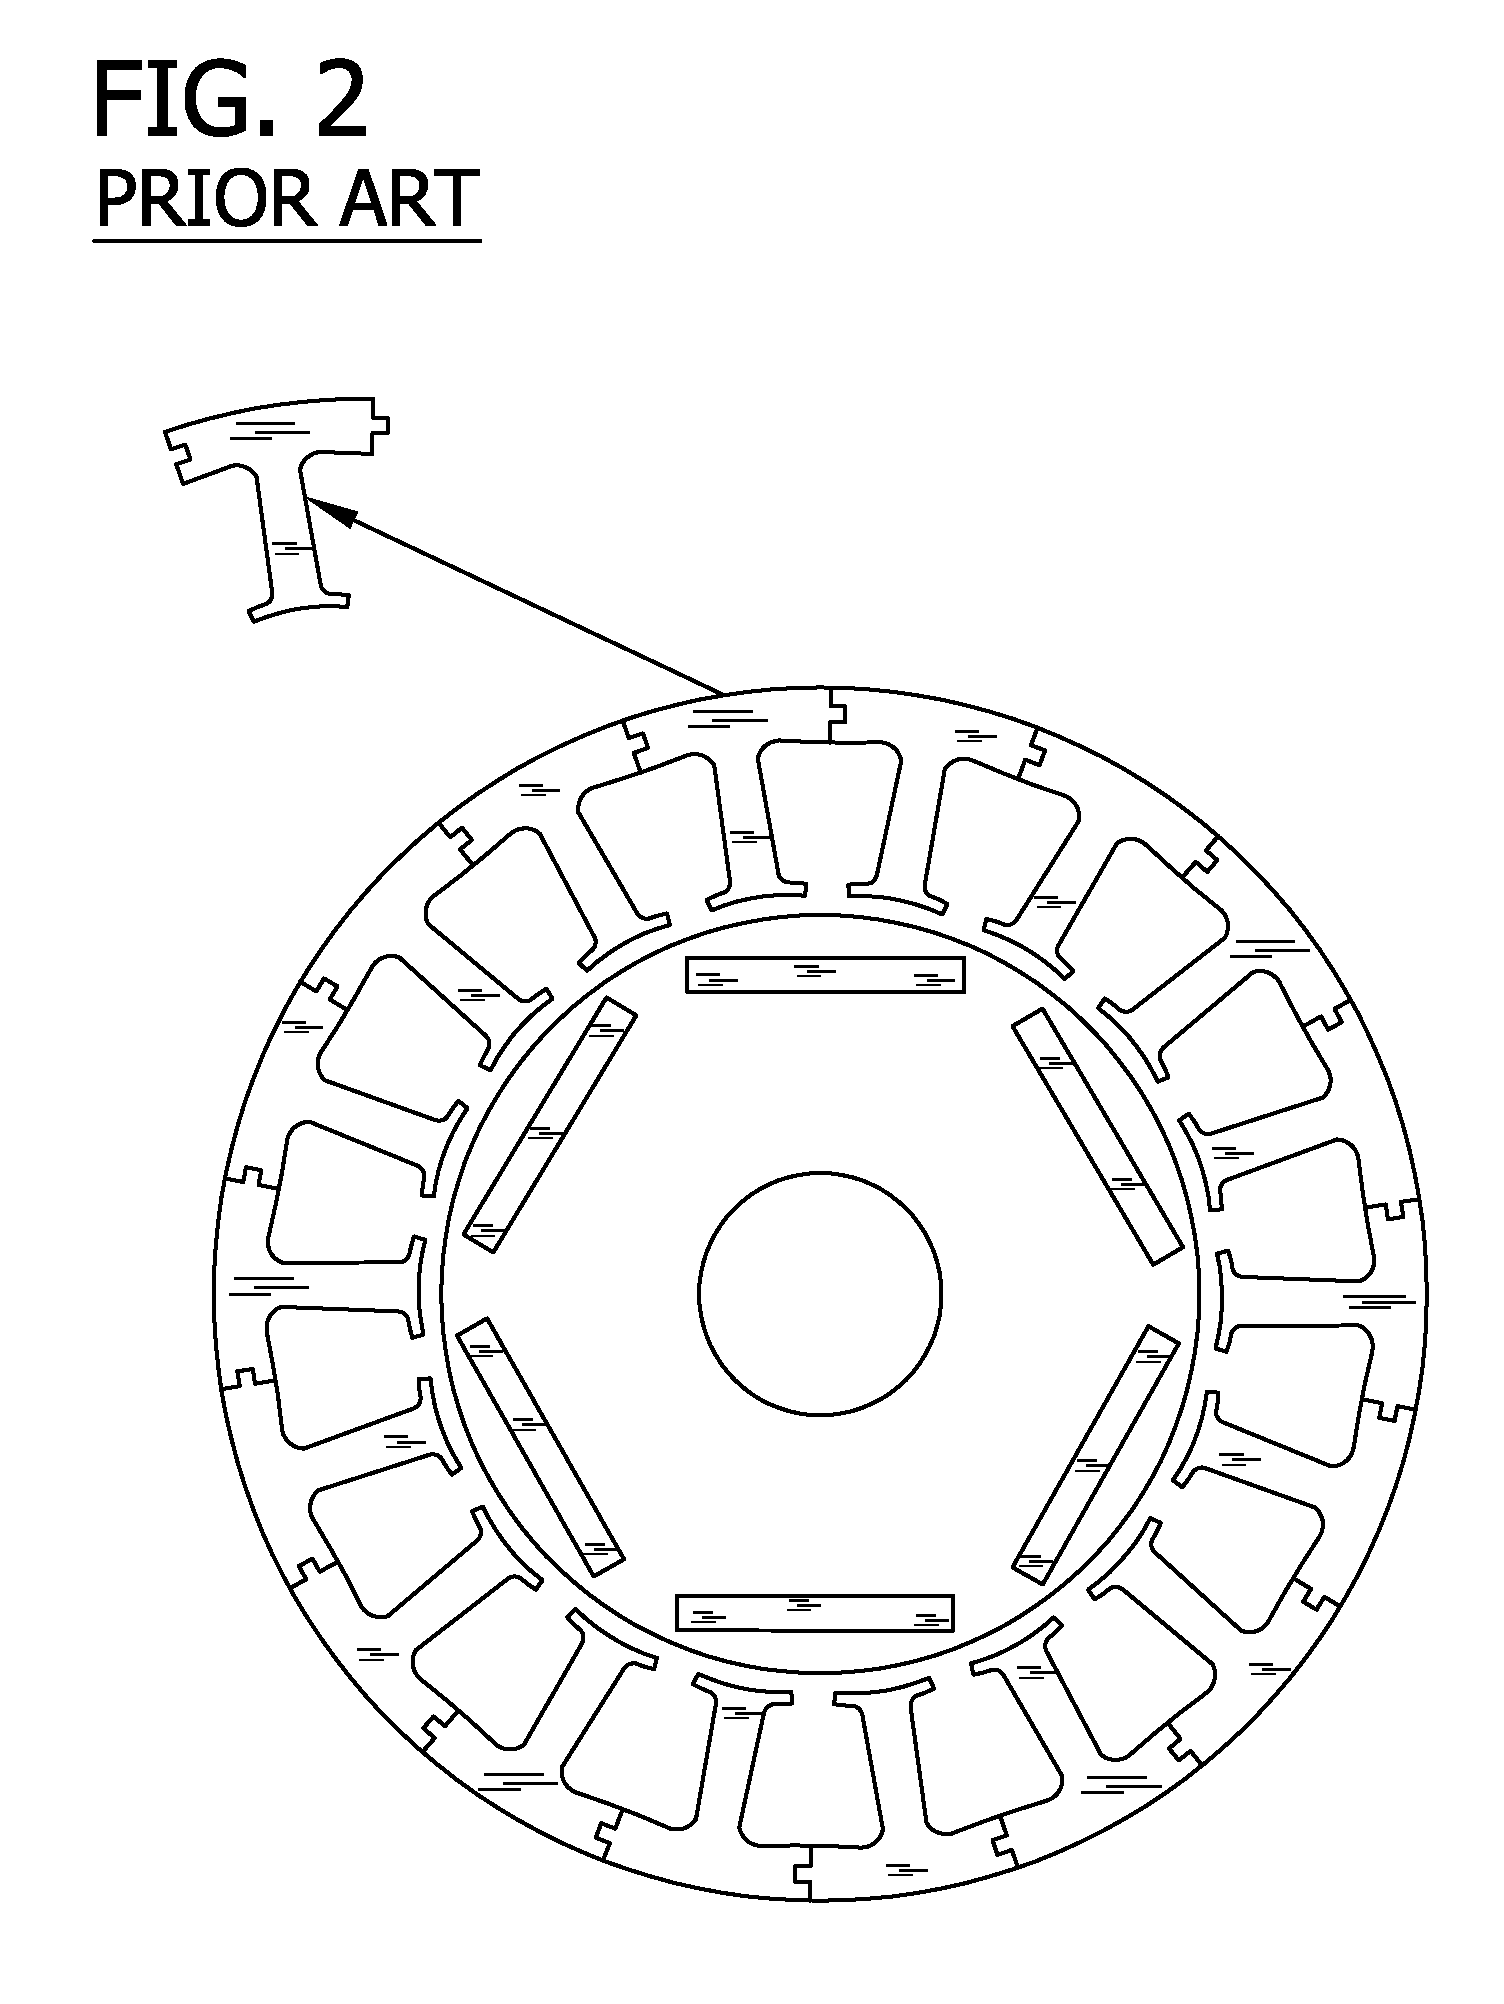 Segmented inner stator and brushless permanent magnet motor with the same